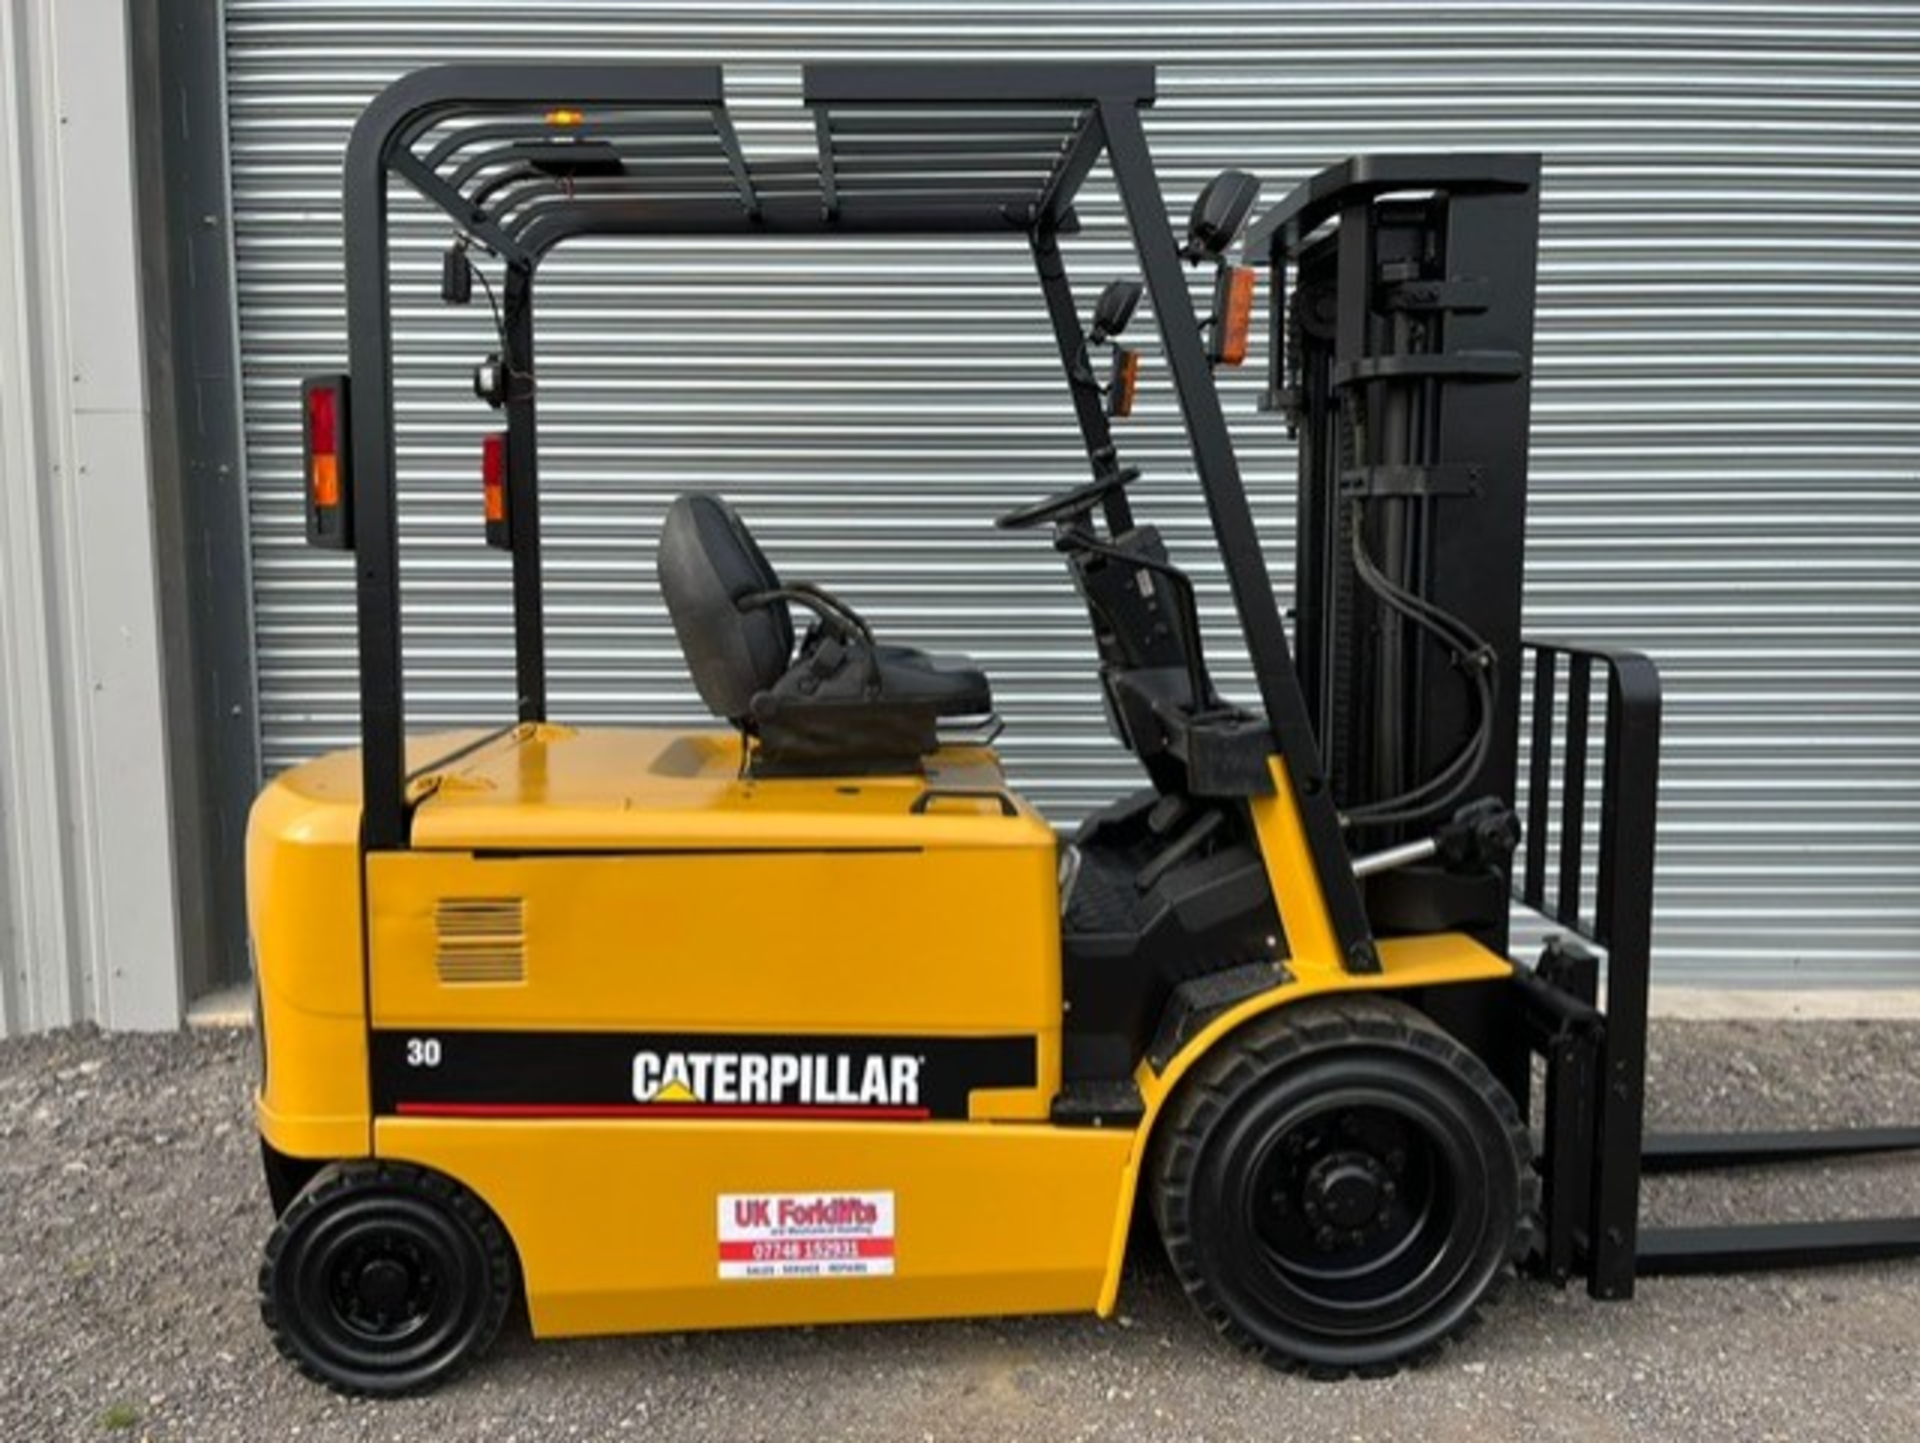 2003 CATERPILLAR, 3 Tonne Electric Forklift - Image 2 of 8